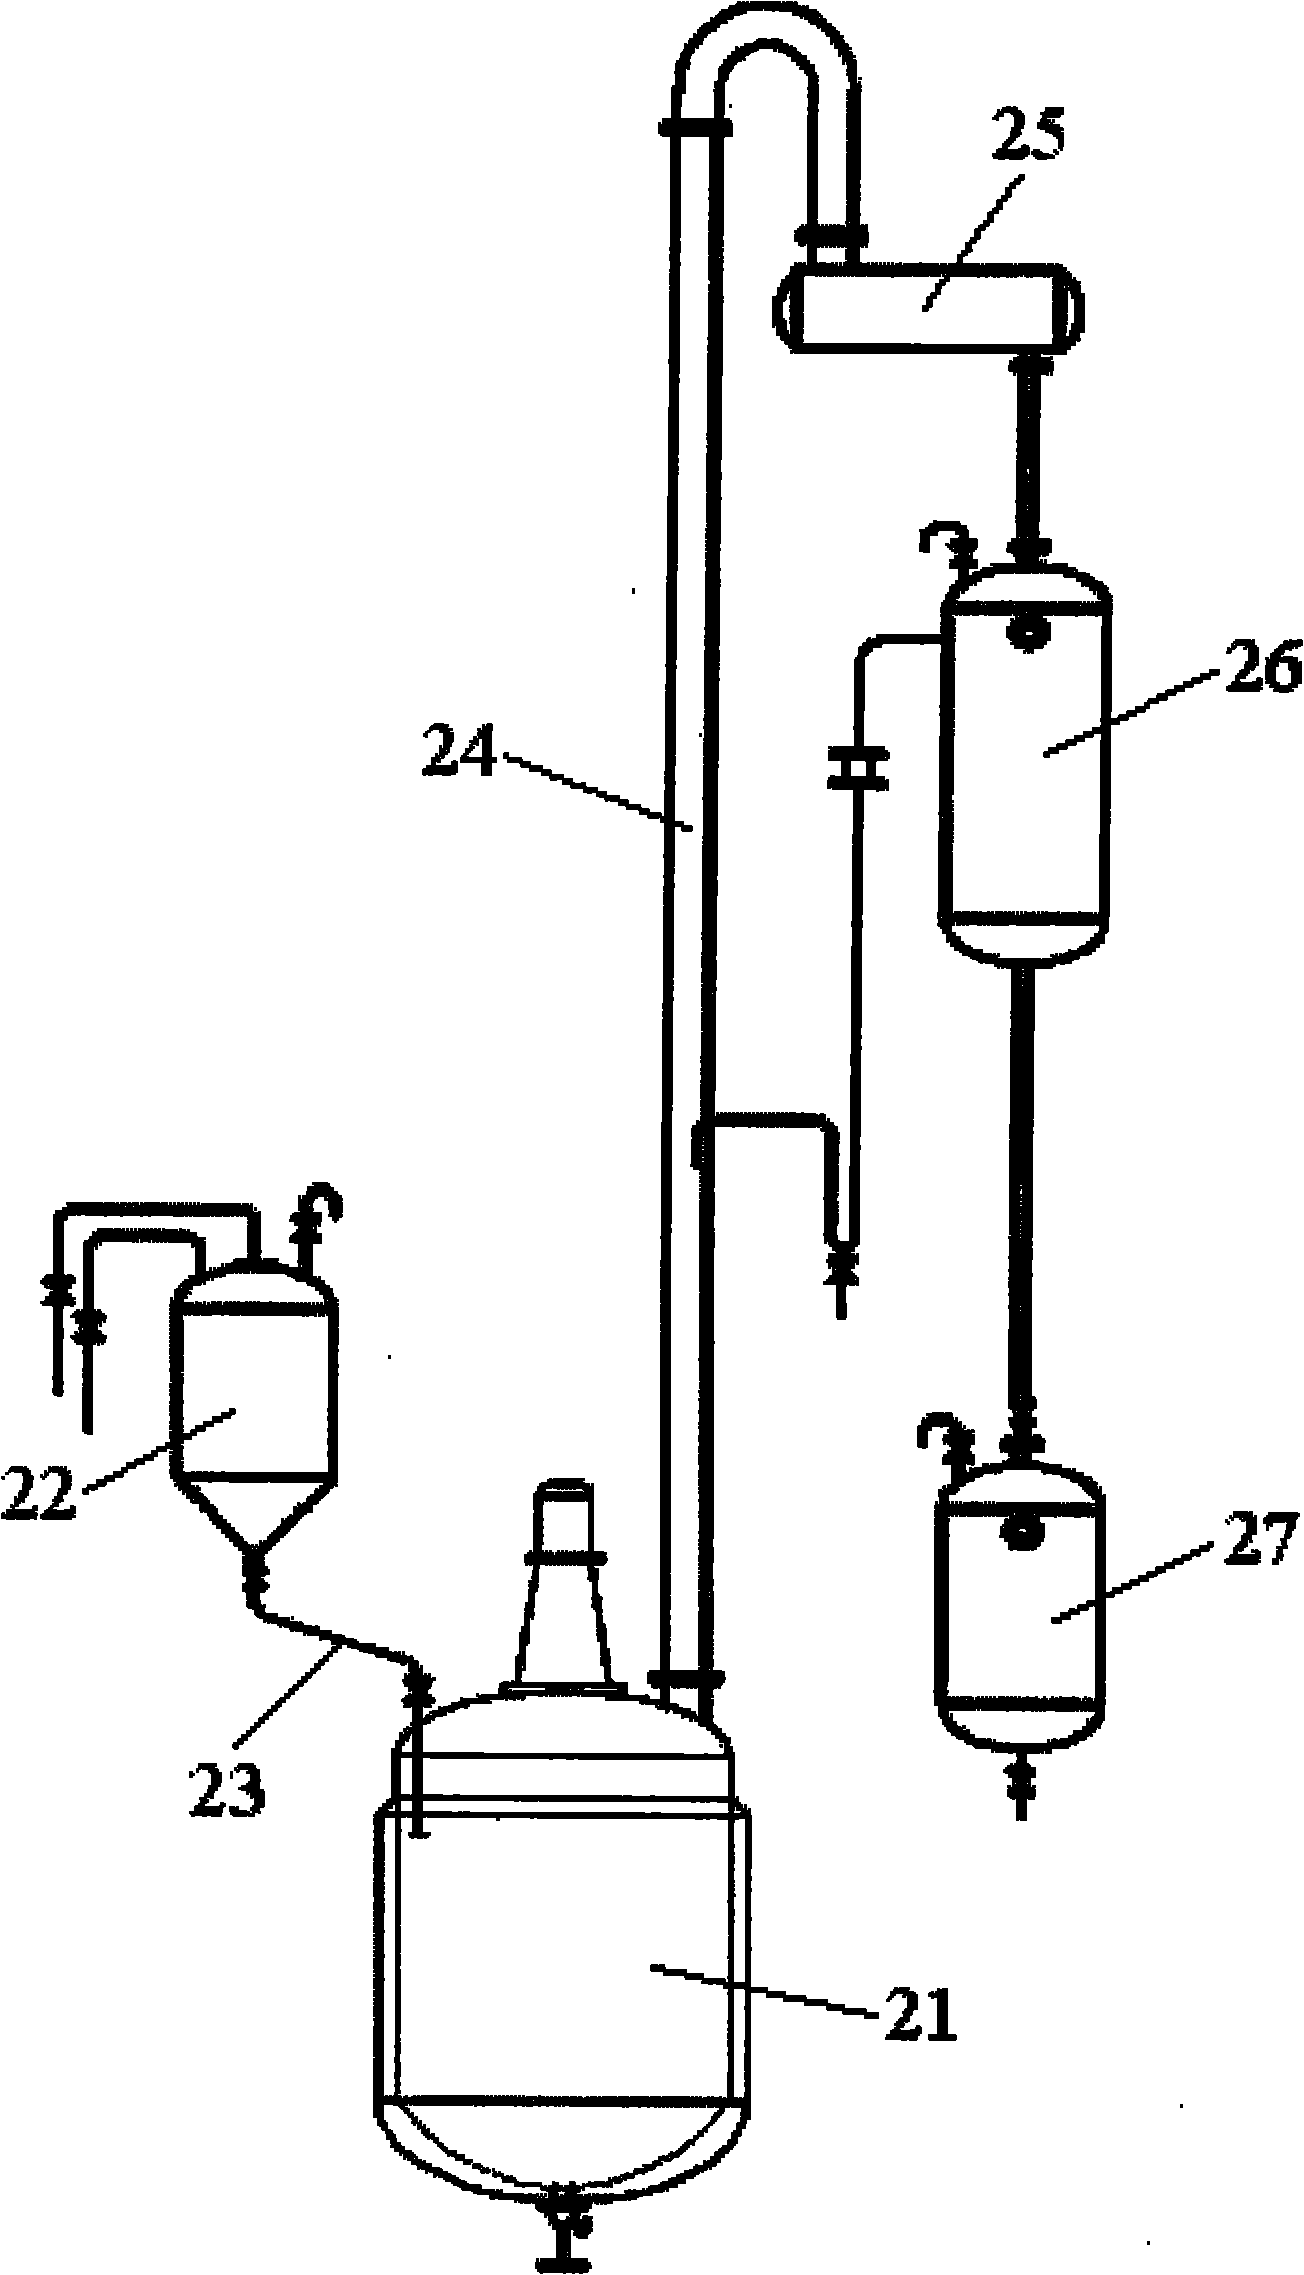 Production method for natural benzaldehyde